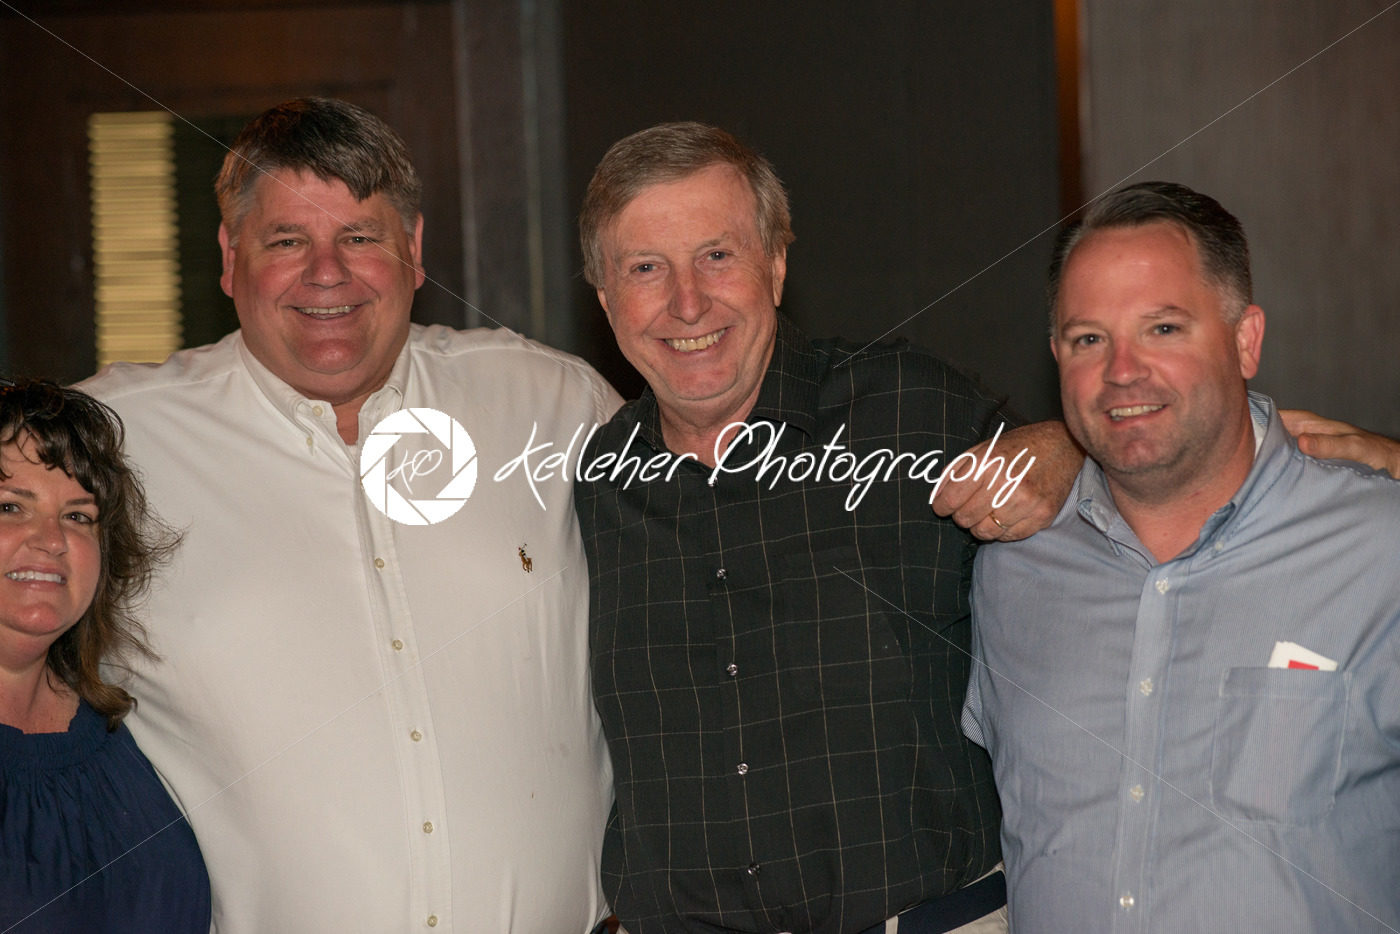 VALLEY FORGE CASINO, KING OF PRUSSIA, PA – JULY 15: Philadelphia Sportscaster Ray Didinger at Kendall’s Crusade fundraising event on July 15, 2017 - Kelleher Photography Store